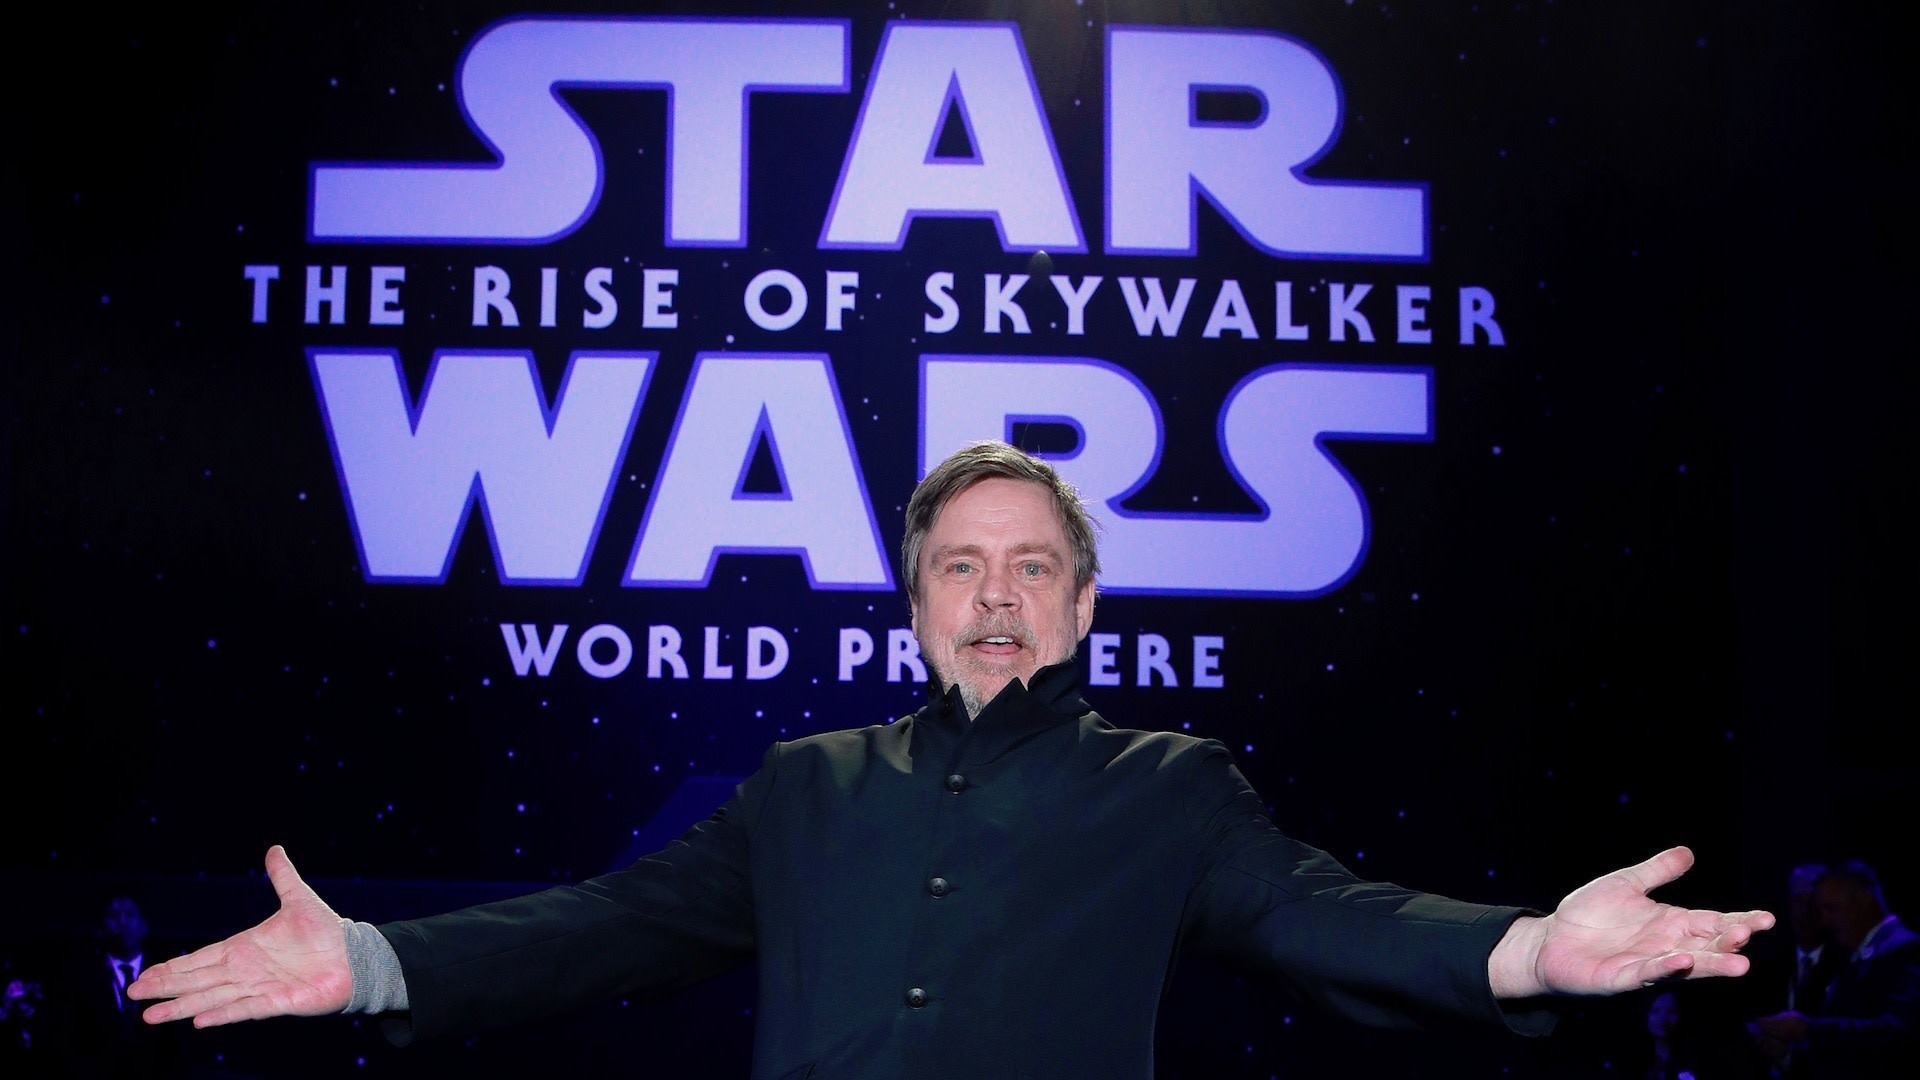 Mark Hamill warns fans to say goodbye to Luke Skywalker as he's now 'done